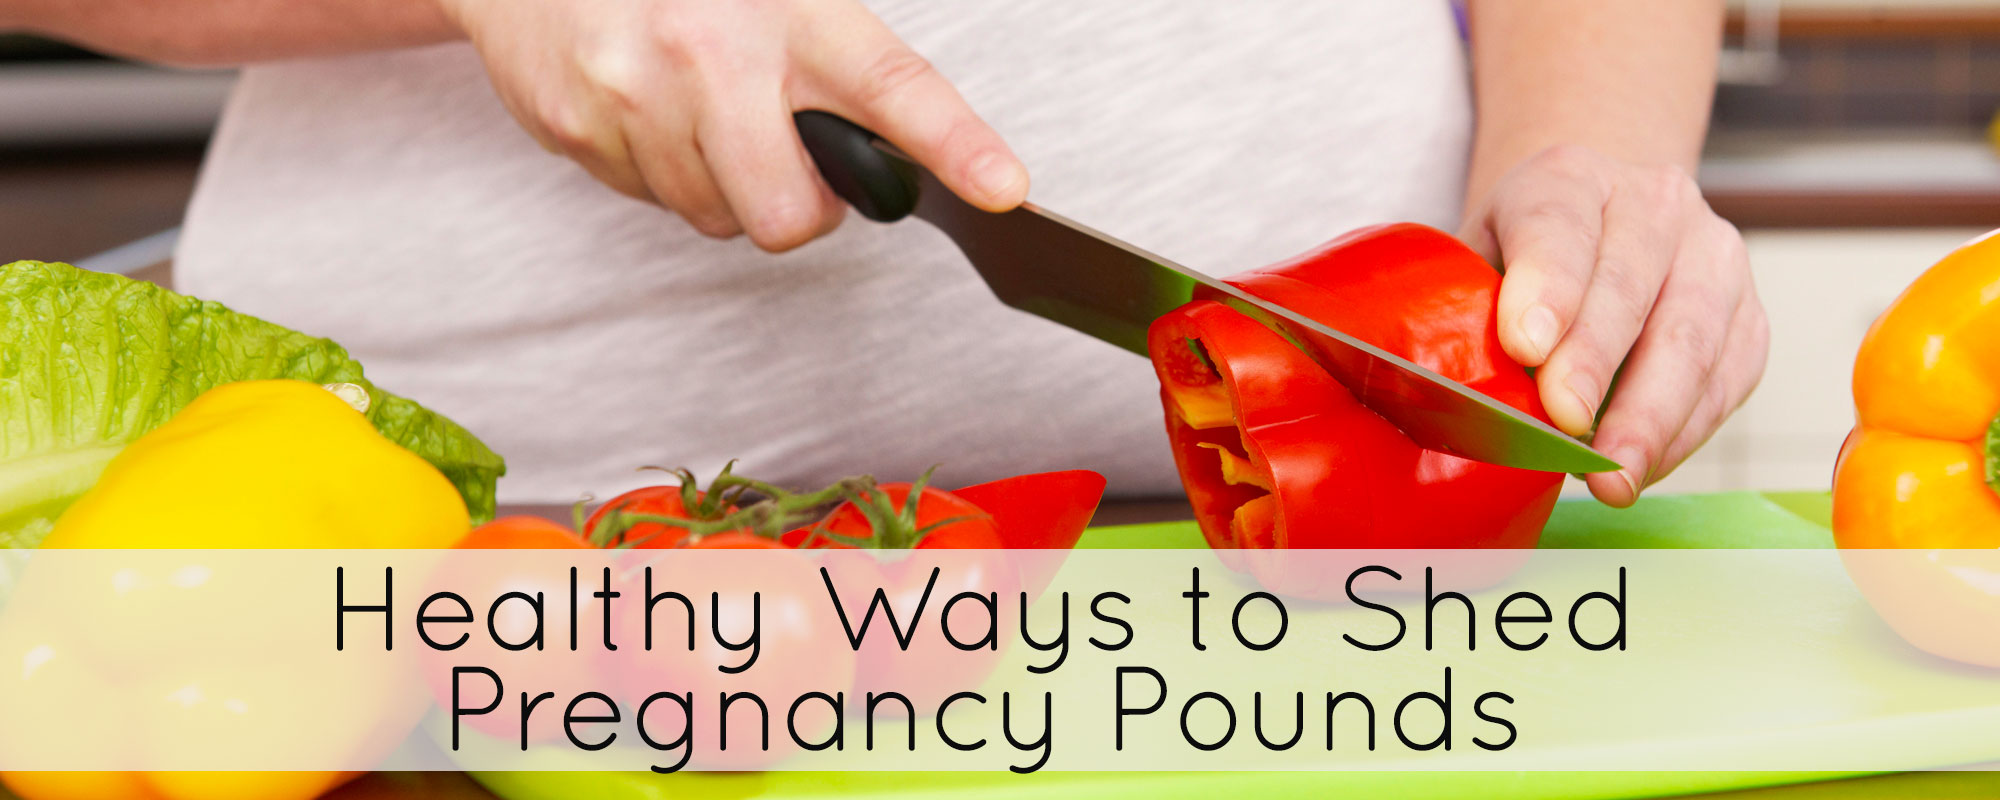 Healthy Ways to Shed Pregnancy Pounds